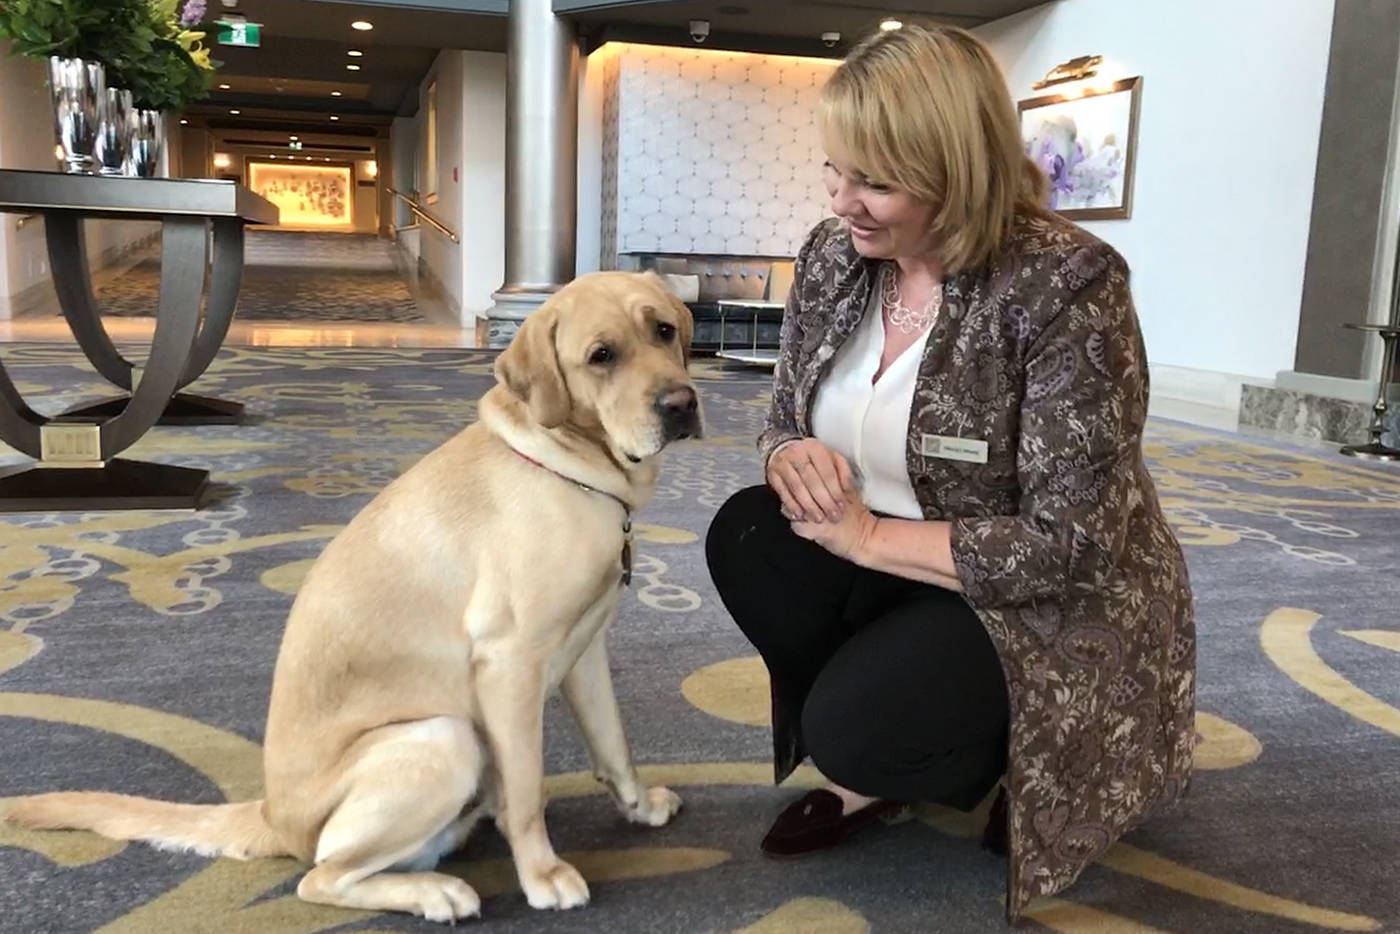 Winston officially started in his new role as canine ambassador at Fairmont Empress this week. Tracy Drake, director of Public Relations at Fairmont Empress, says he has received a warm welcome by both guests and staff. (Keri Coles/News staff)